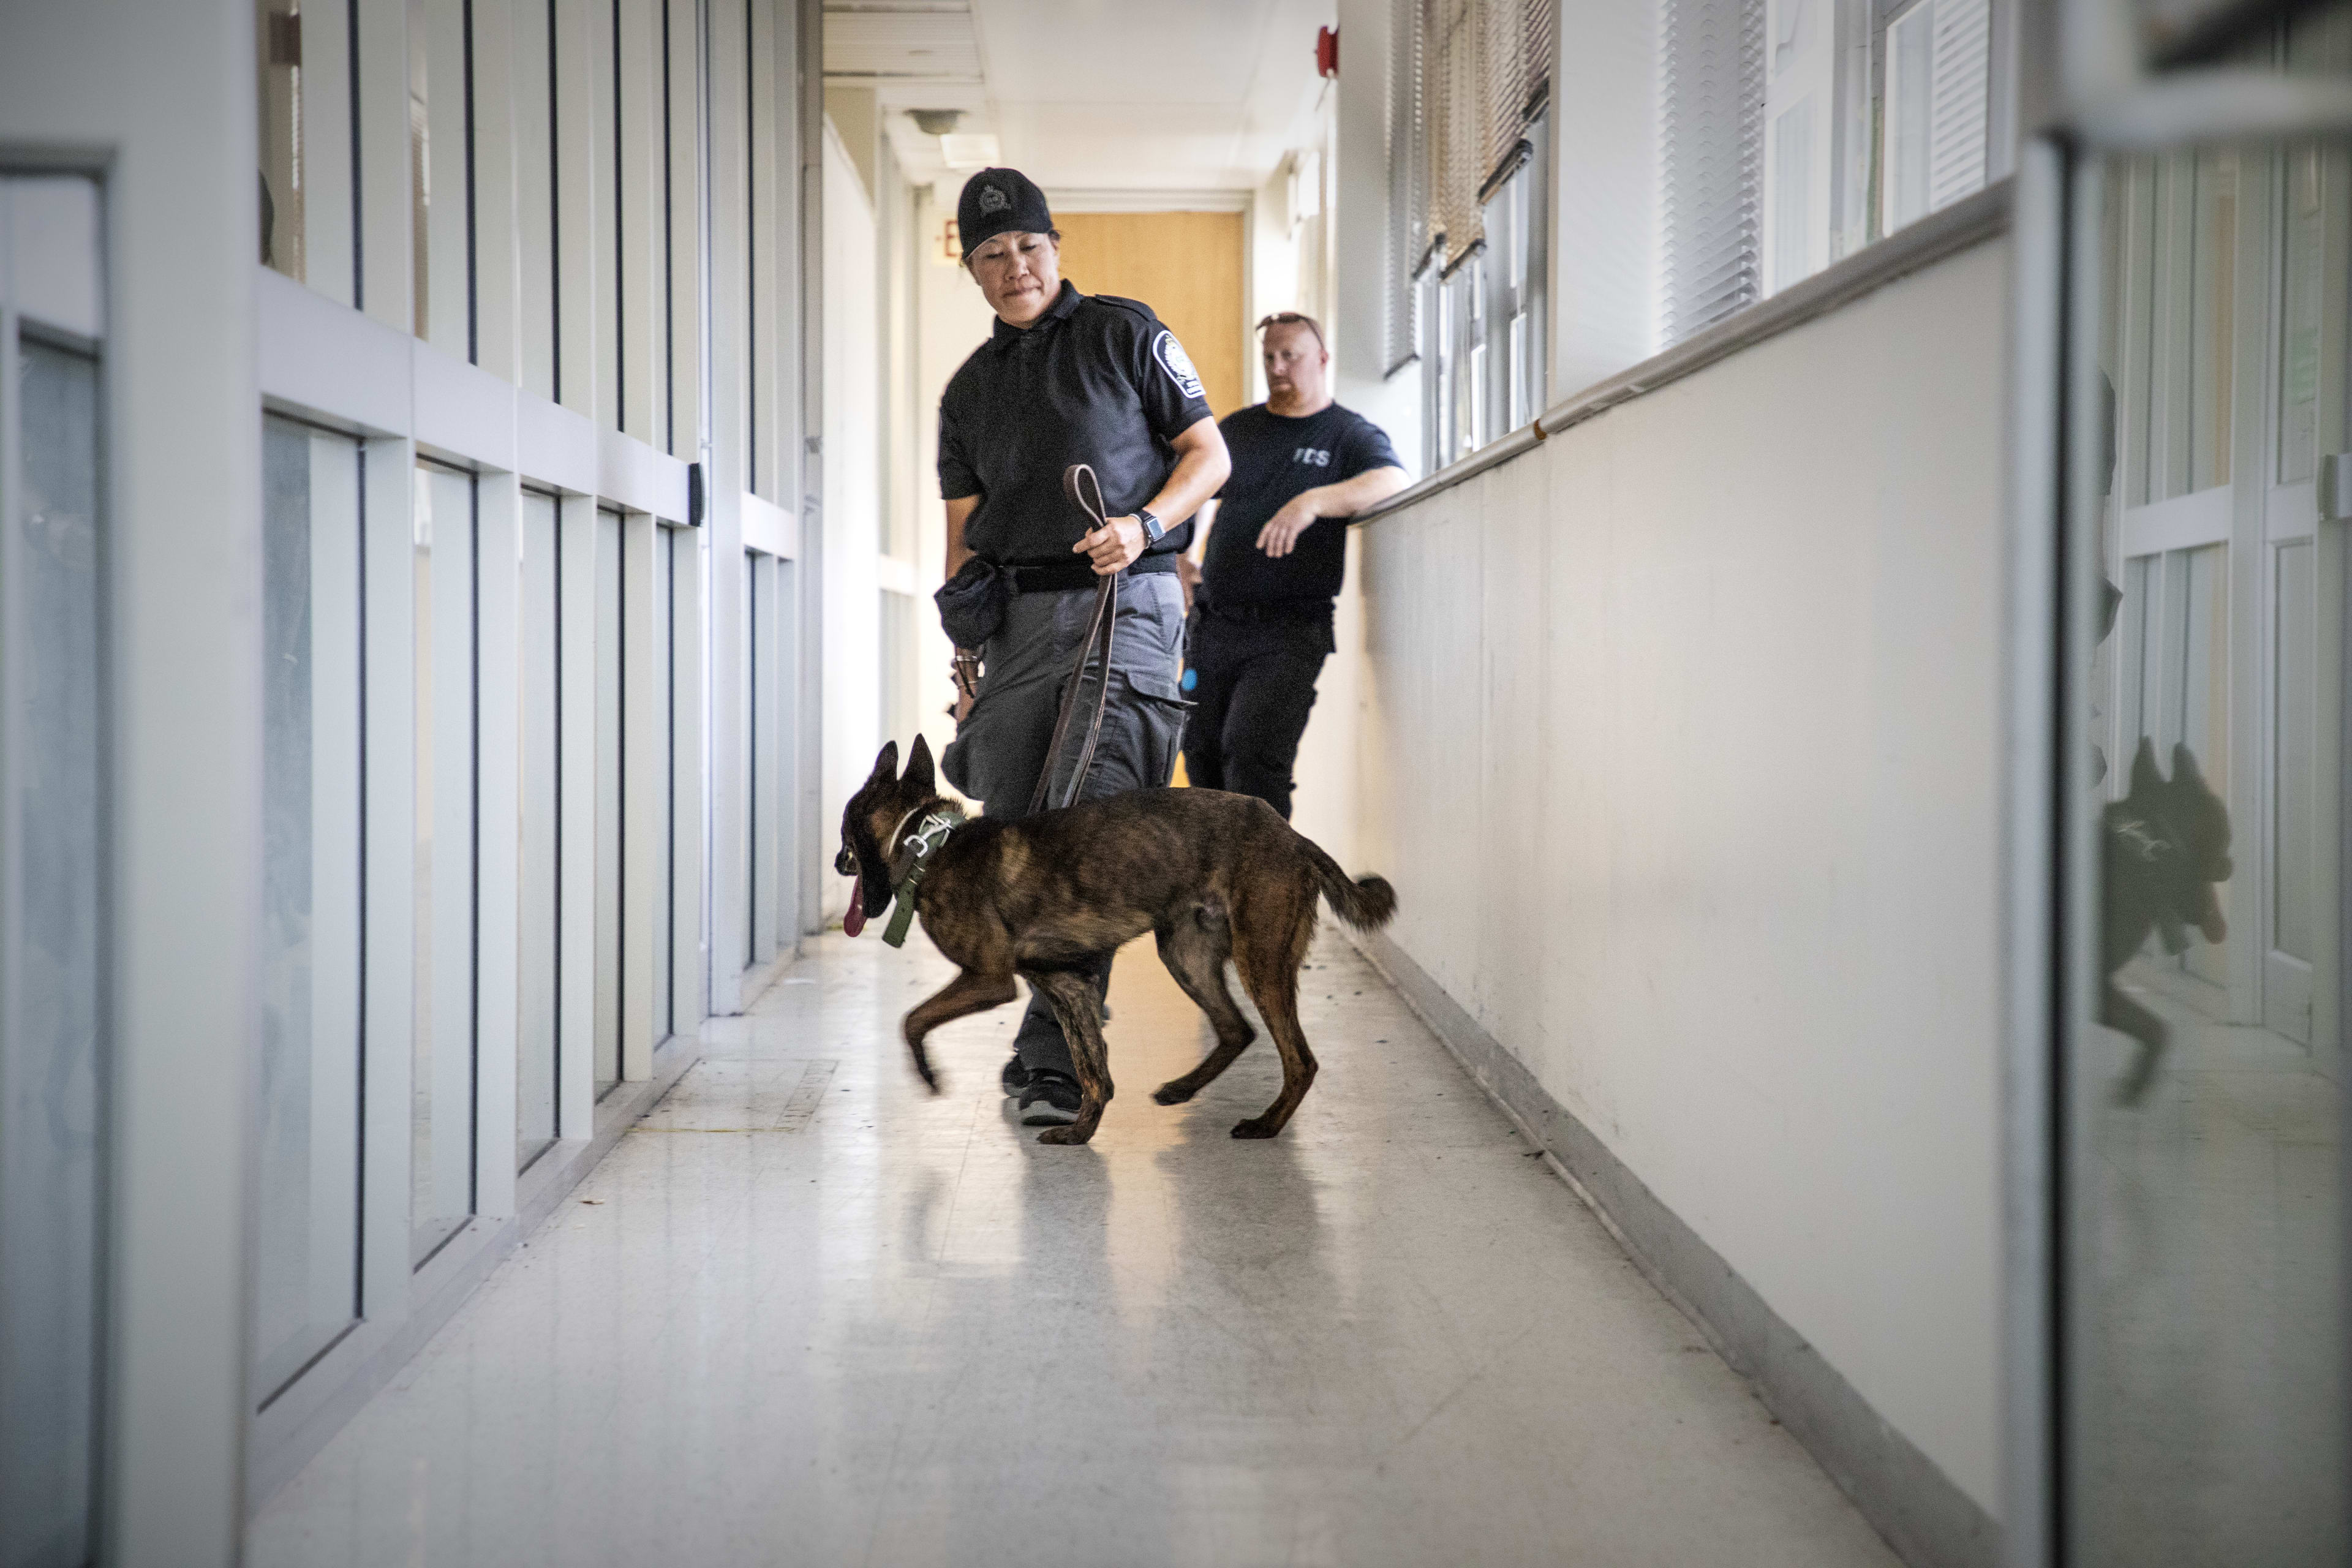 Raiden and his handler are seen patrolling a hallway.